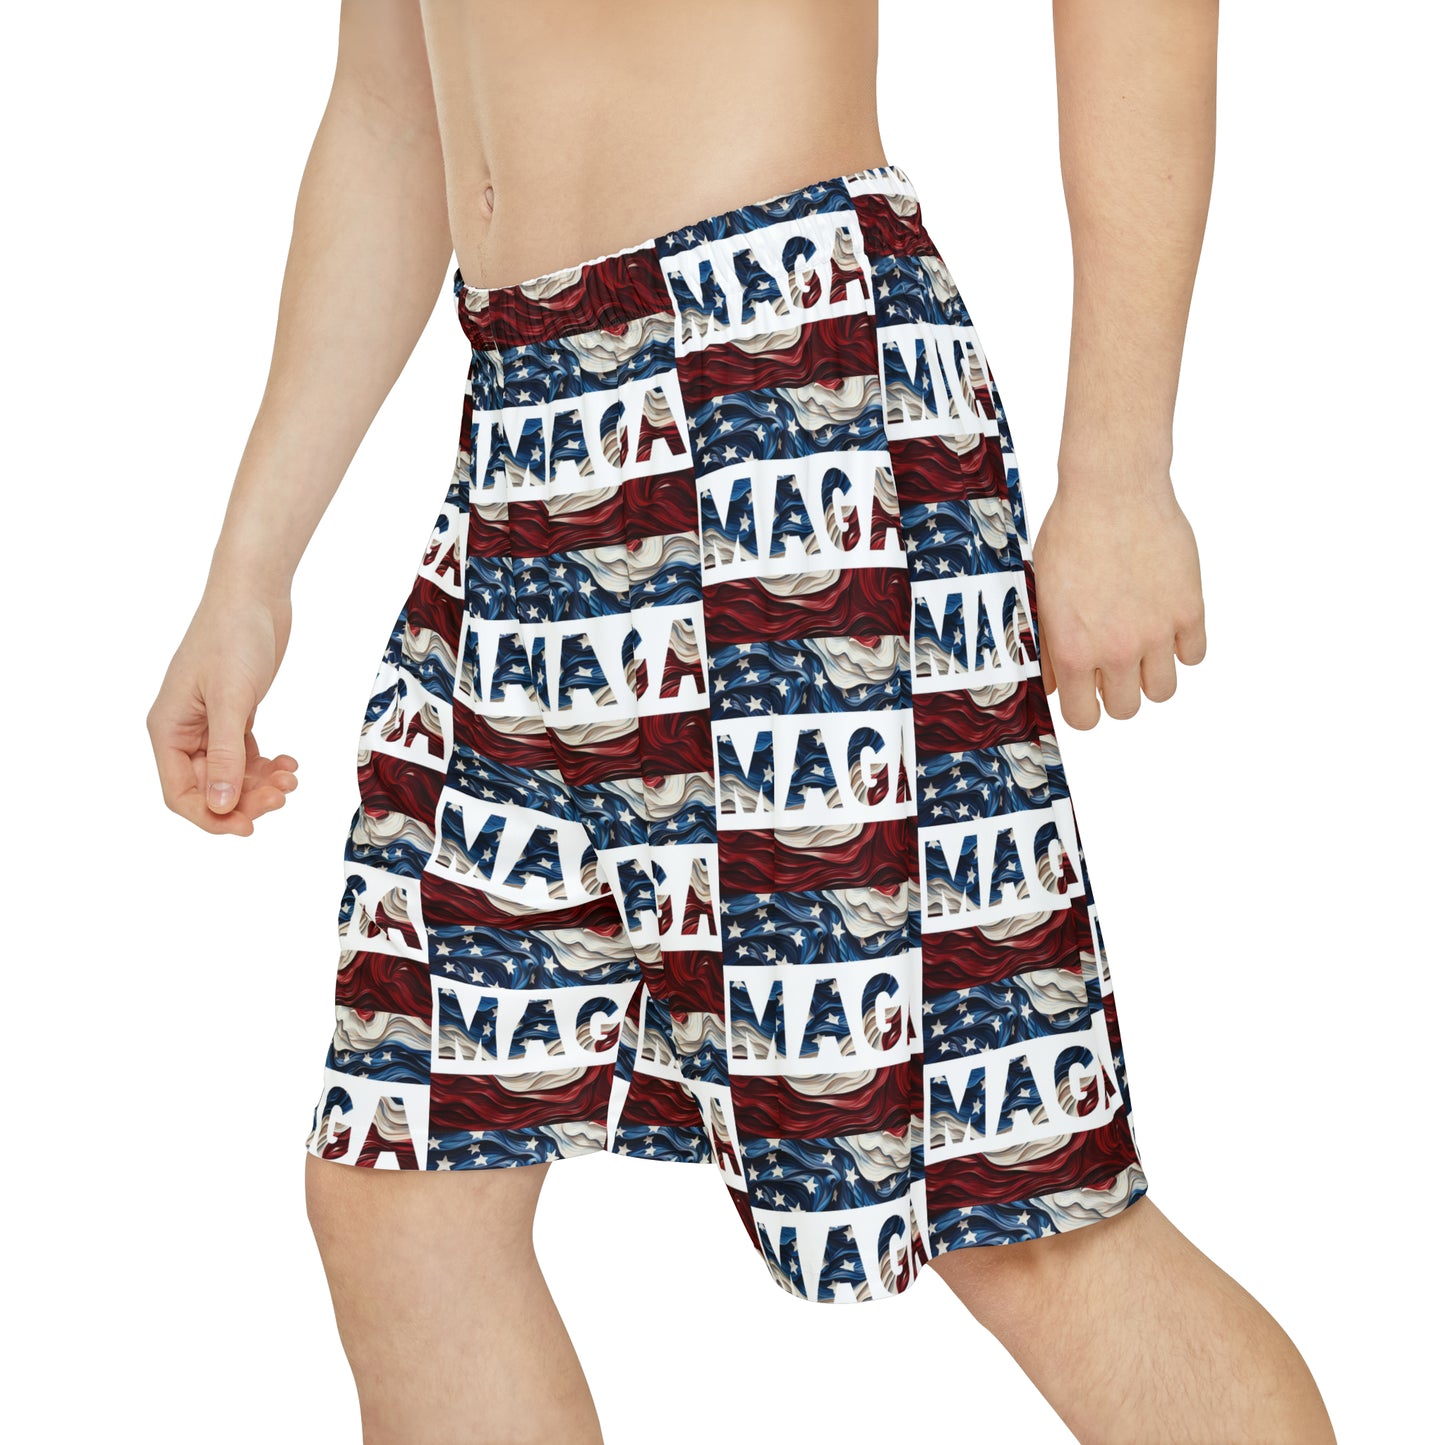 MAGA Trump Red White and Blue All over Print Men’s Sports Athletic Shorts